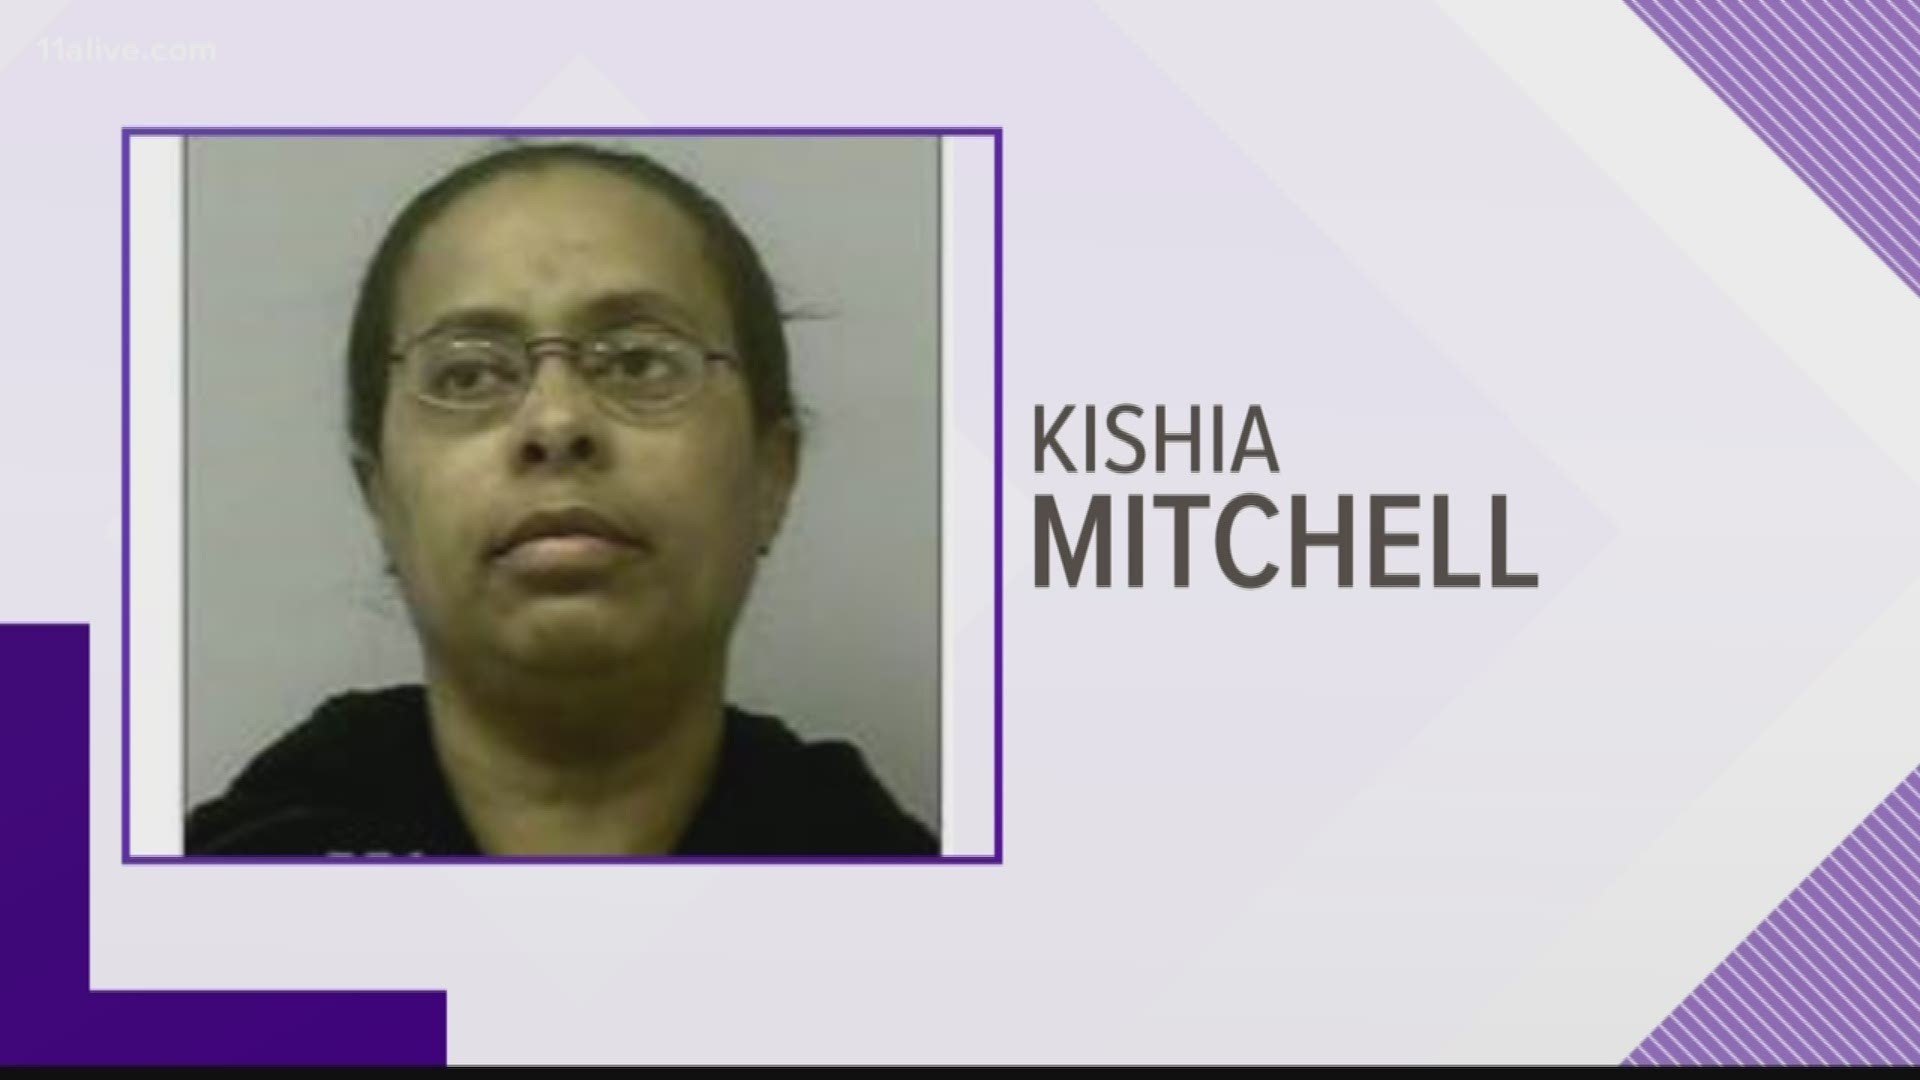 Healthcare worker wanted since October 2019 has now disappeared with another elderly woman, according to Gwinnett County police.